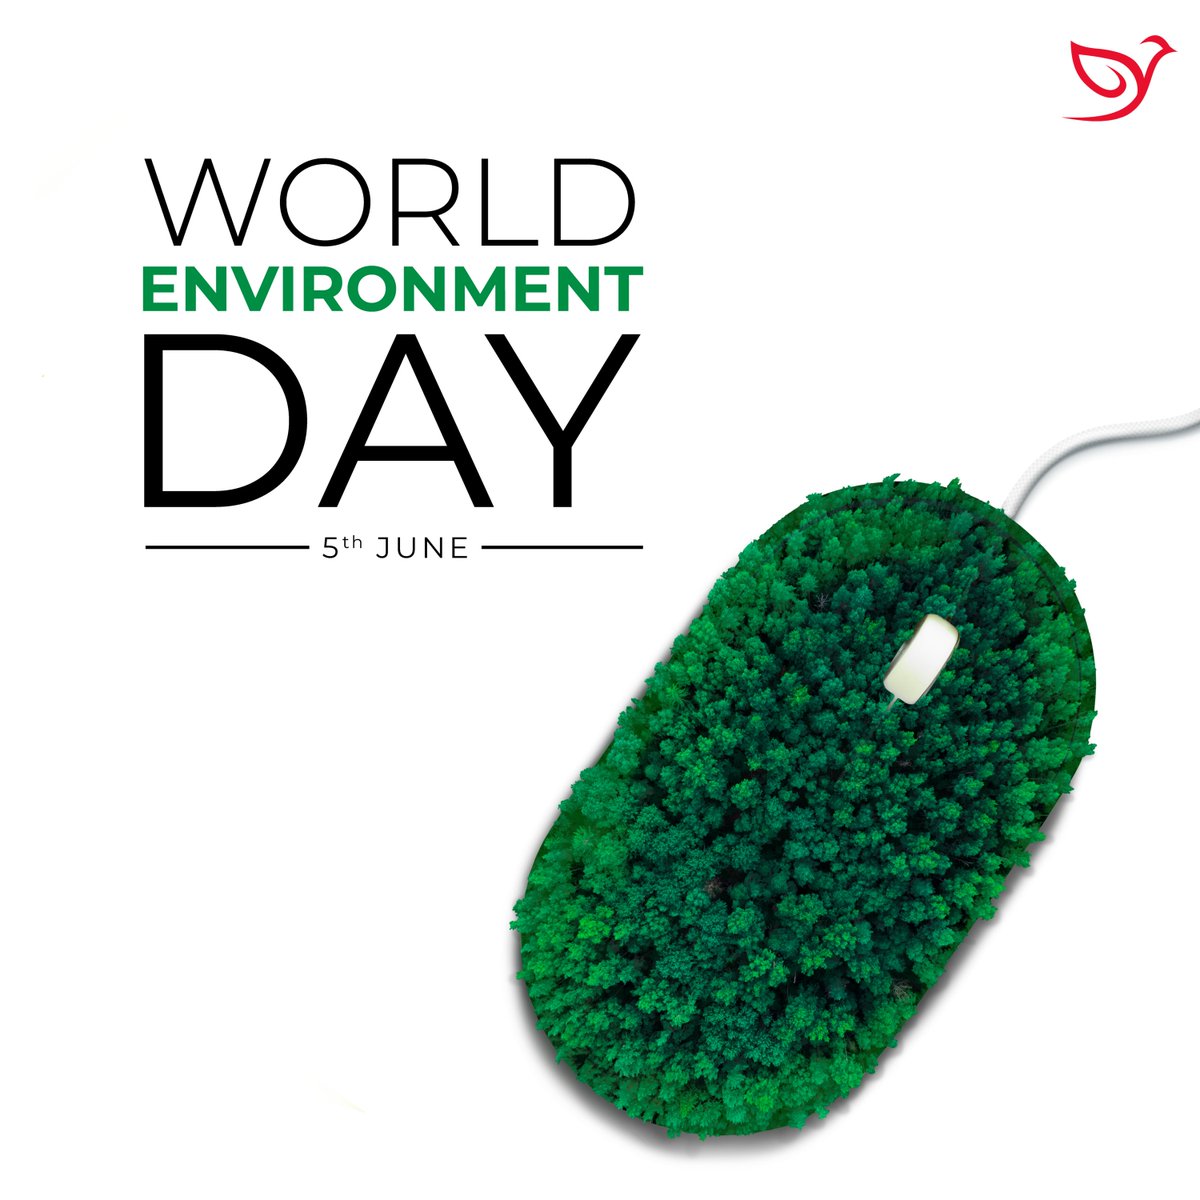 Let’s build environmental awareness and work towards a sustainable future. Happy #worldenvironmentday

#environmentday #growyouraudience #marketingdigital #marketingonline #marketingstrategy #5june #marketingagency #marketingpartner